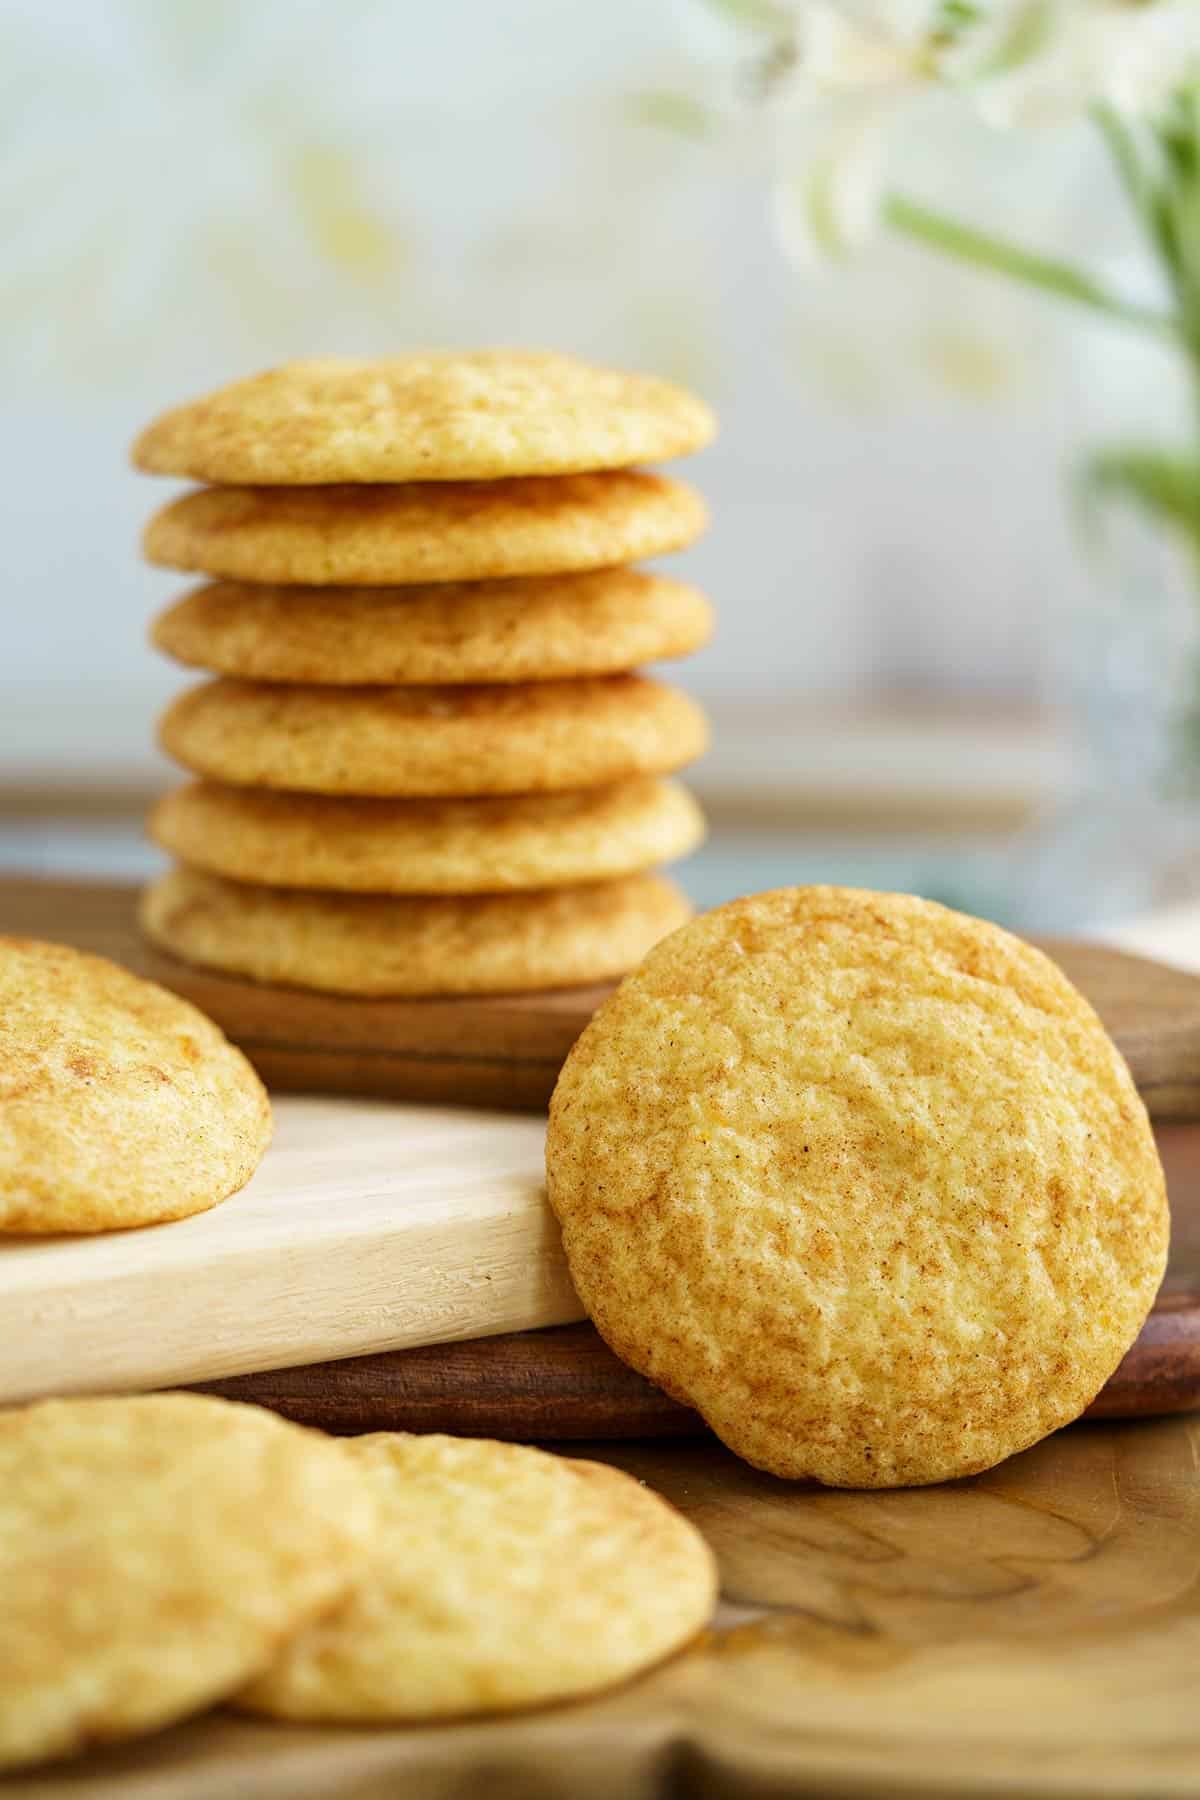 Orange Cardamom Snickerdoodle cookies with cookies stacked and front view.